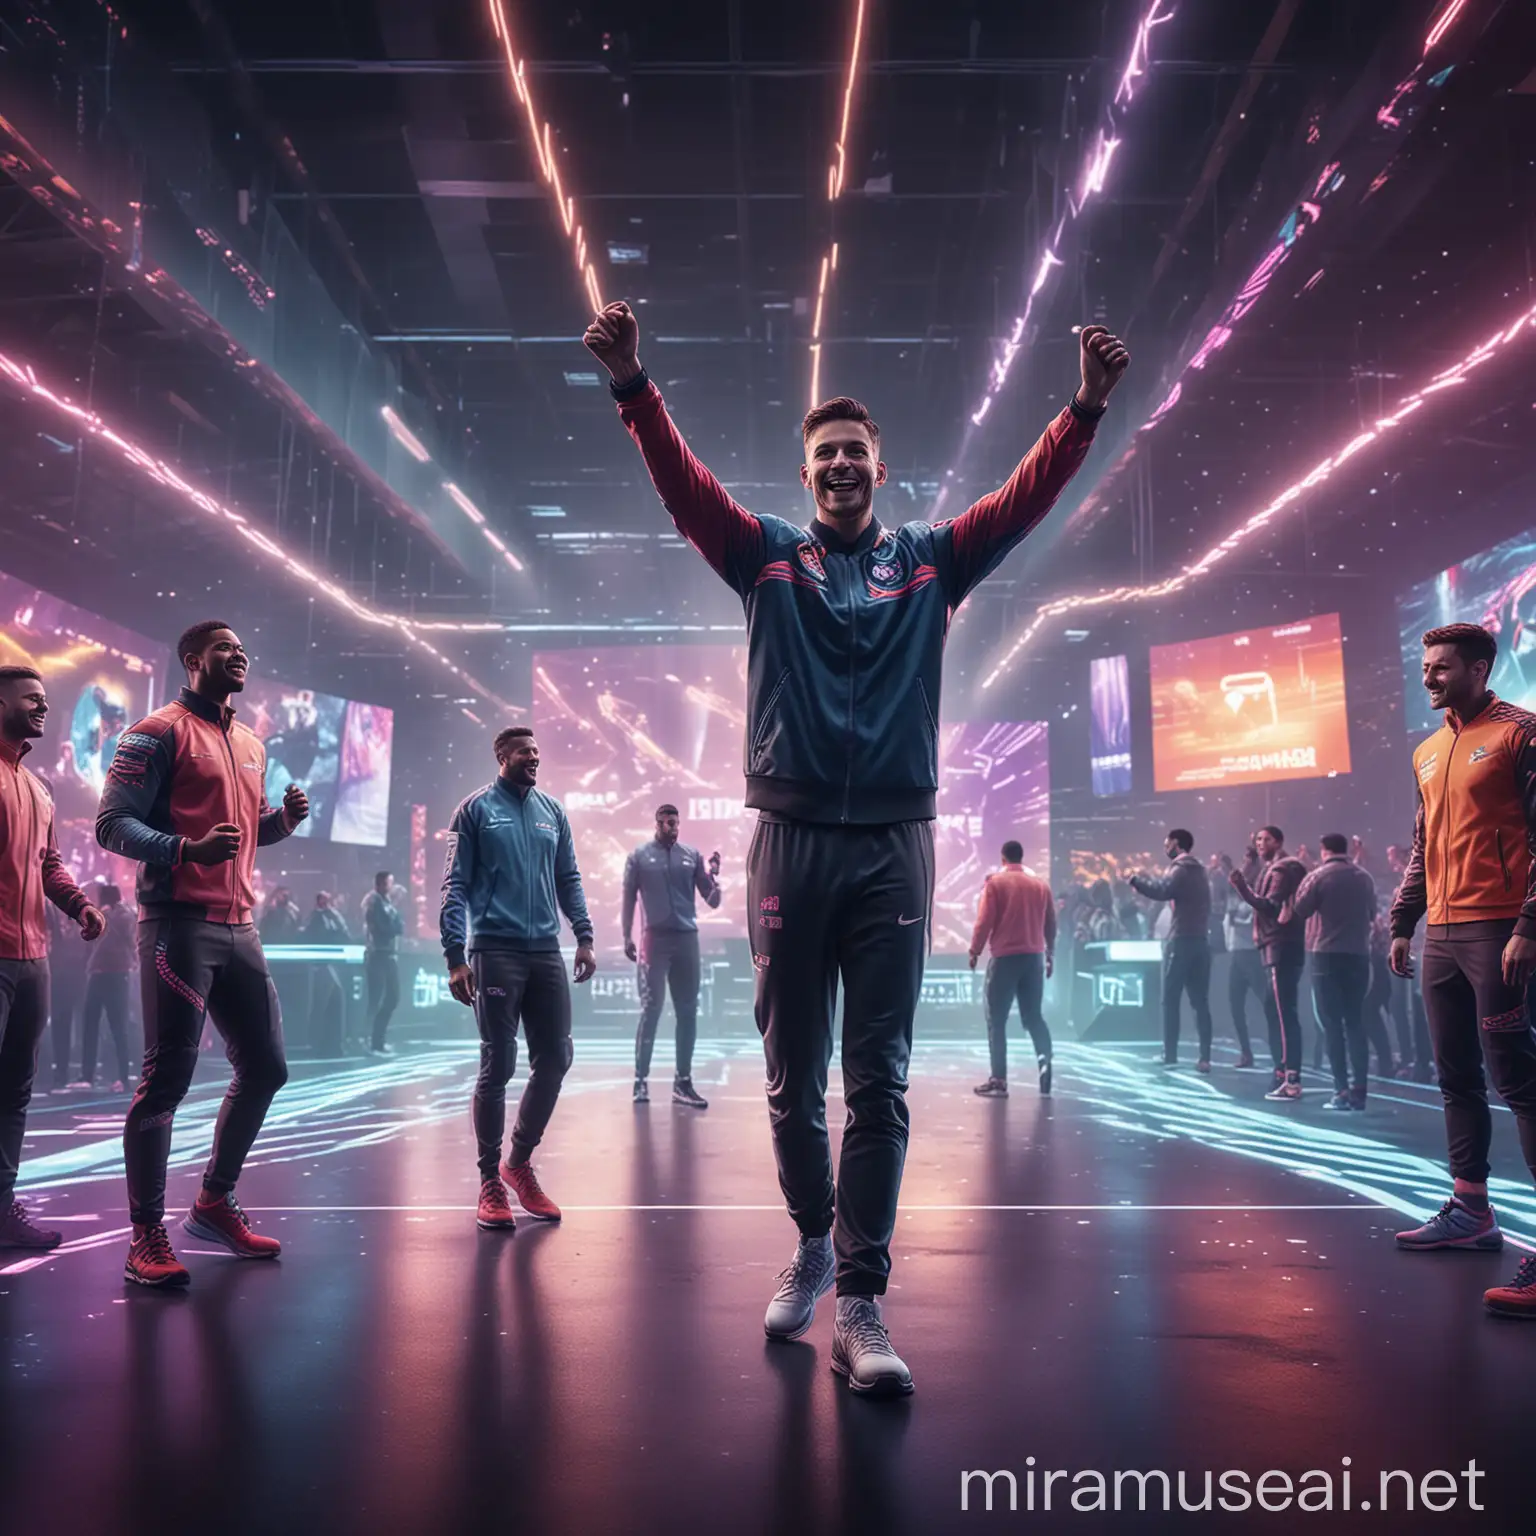 Sportsman surrounded by friends exuding futuristic vibes, as they celebrate an ecstatic victory, fist-pumps and smiles illuminating the air, surrounded by holographic displays of their free bet reward, vibrant neon accents cutting through the ambiance of a high-tech sports facility, captured in an ultra-realistic style, dramatic lighting, shallow depth of field, ultra clear.